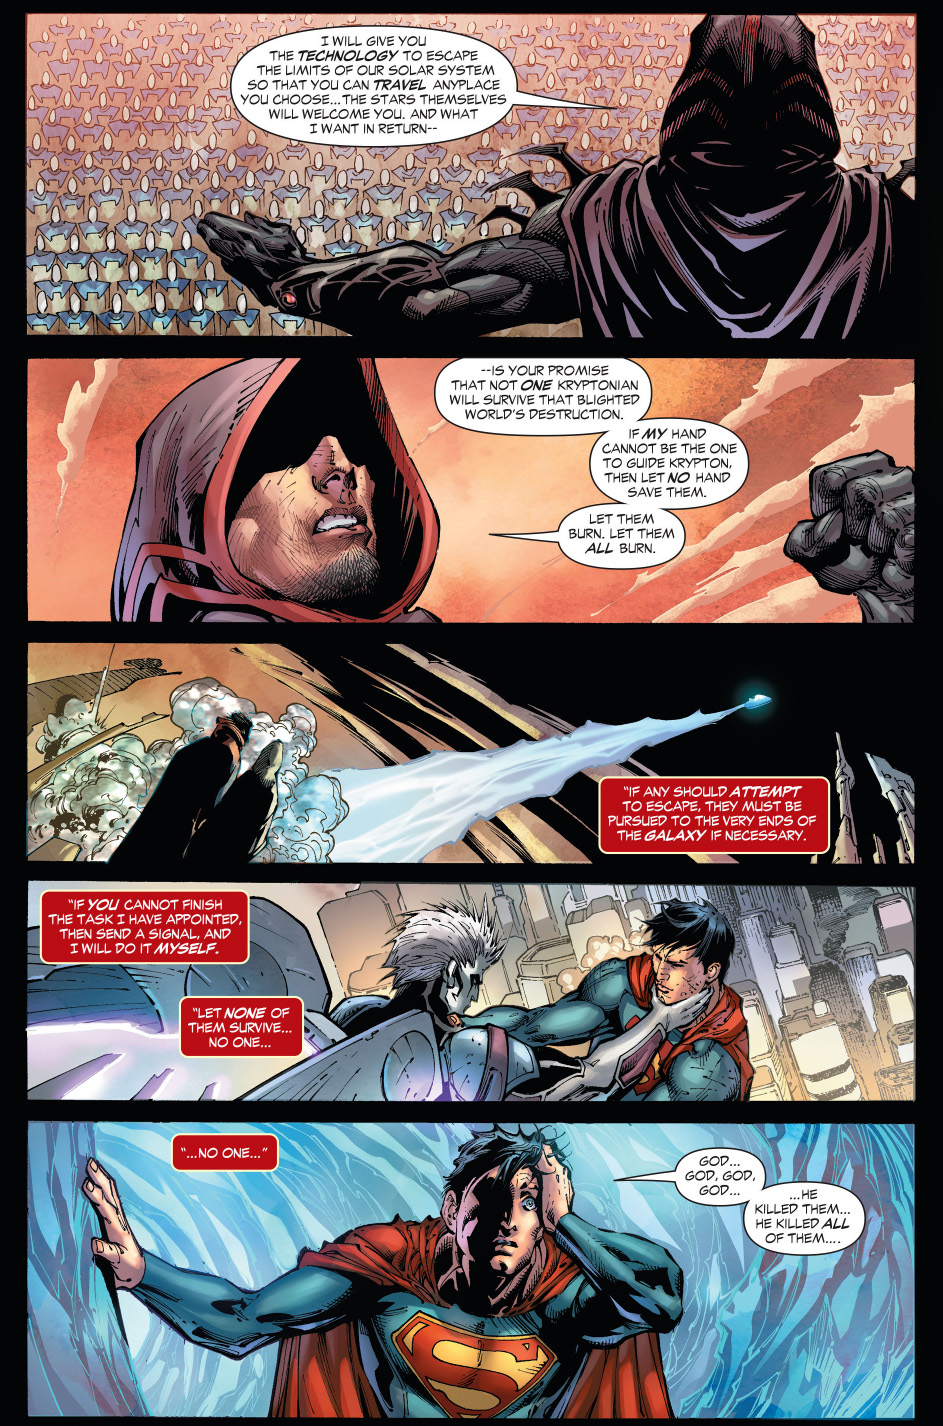 how zod destroyed krypton